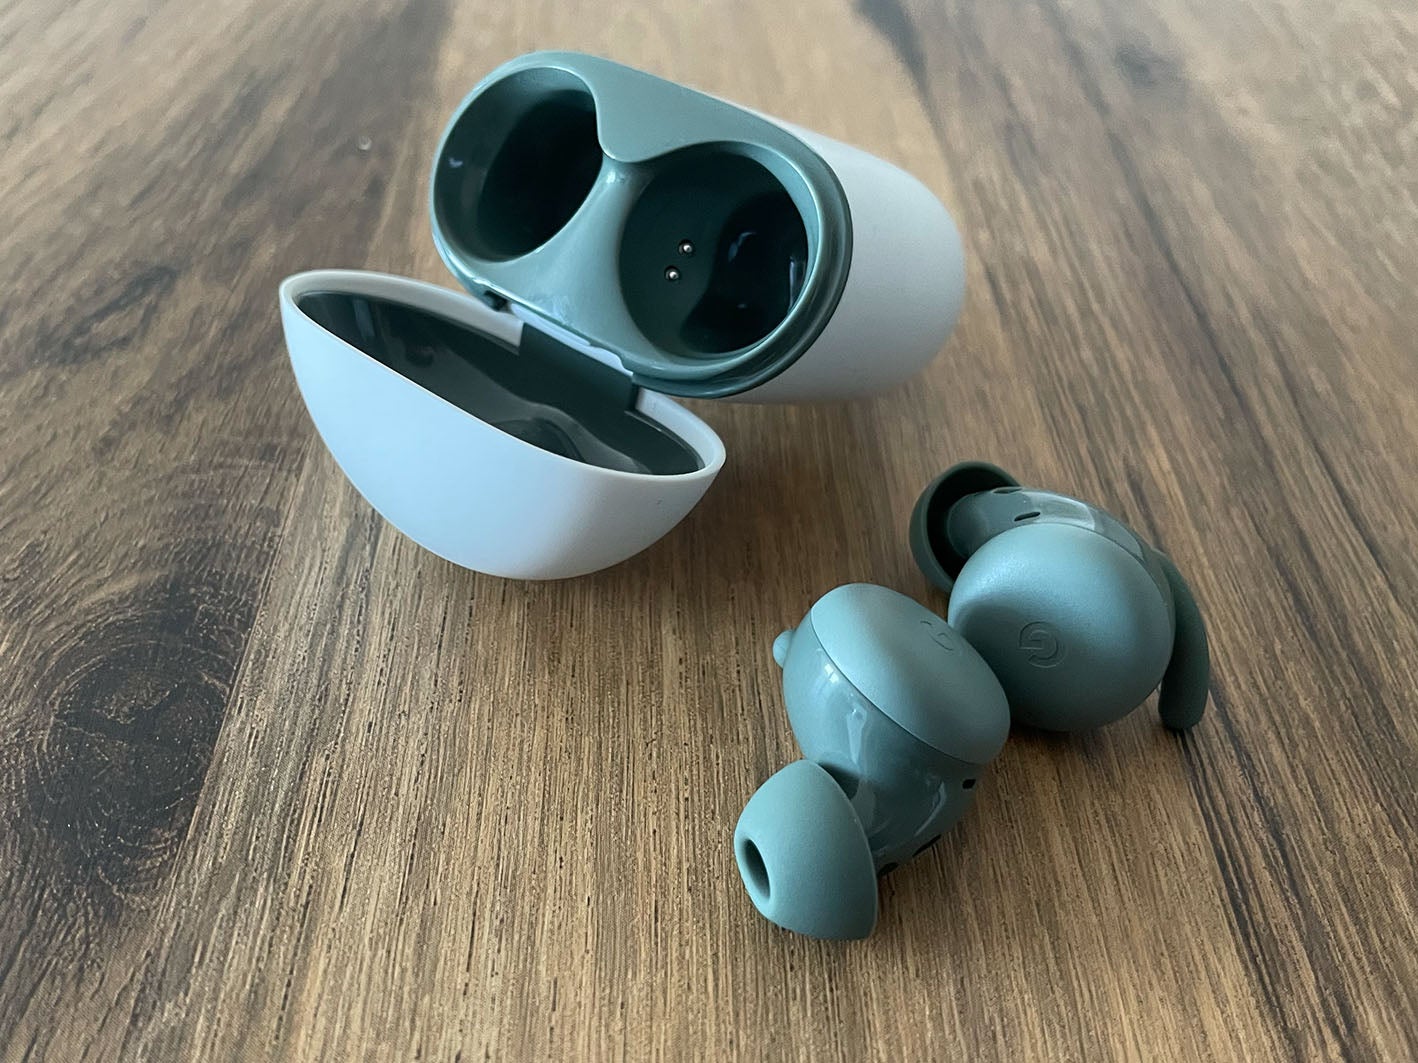 Google Pixel buds A-series review: The budget earphones that rival